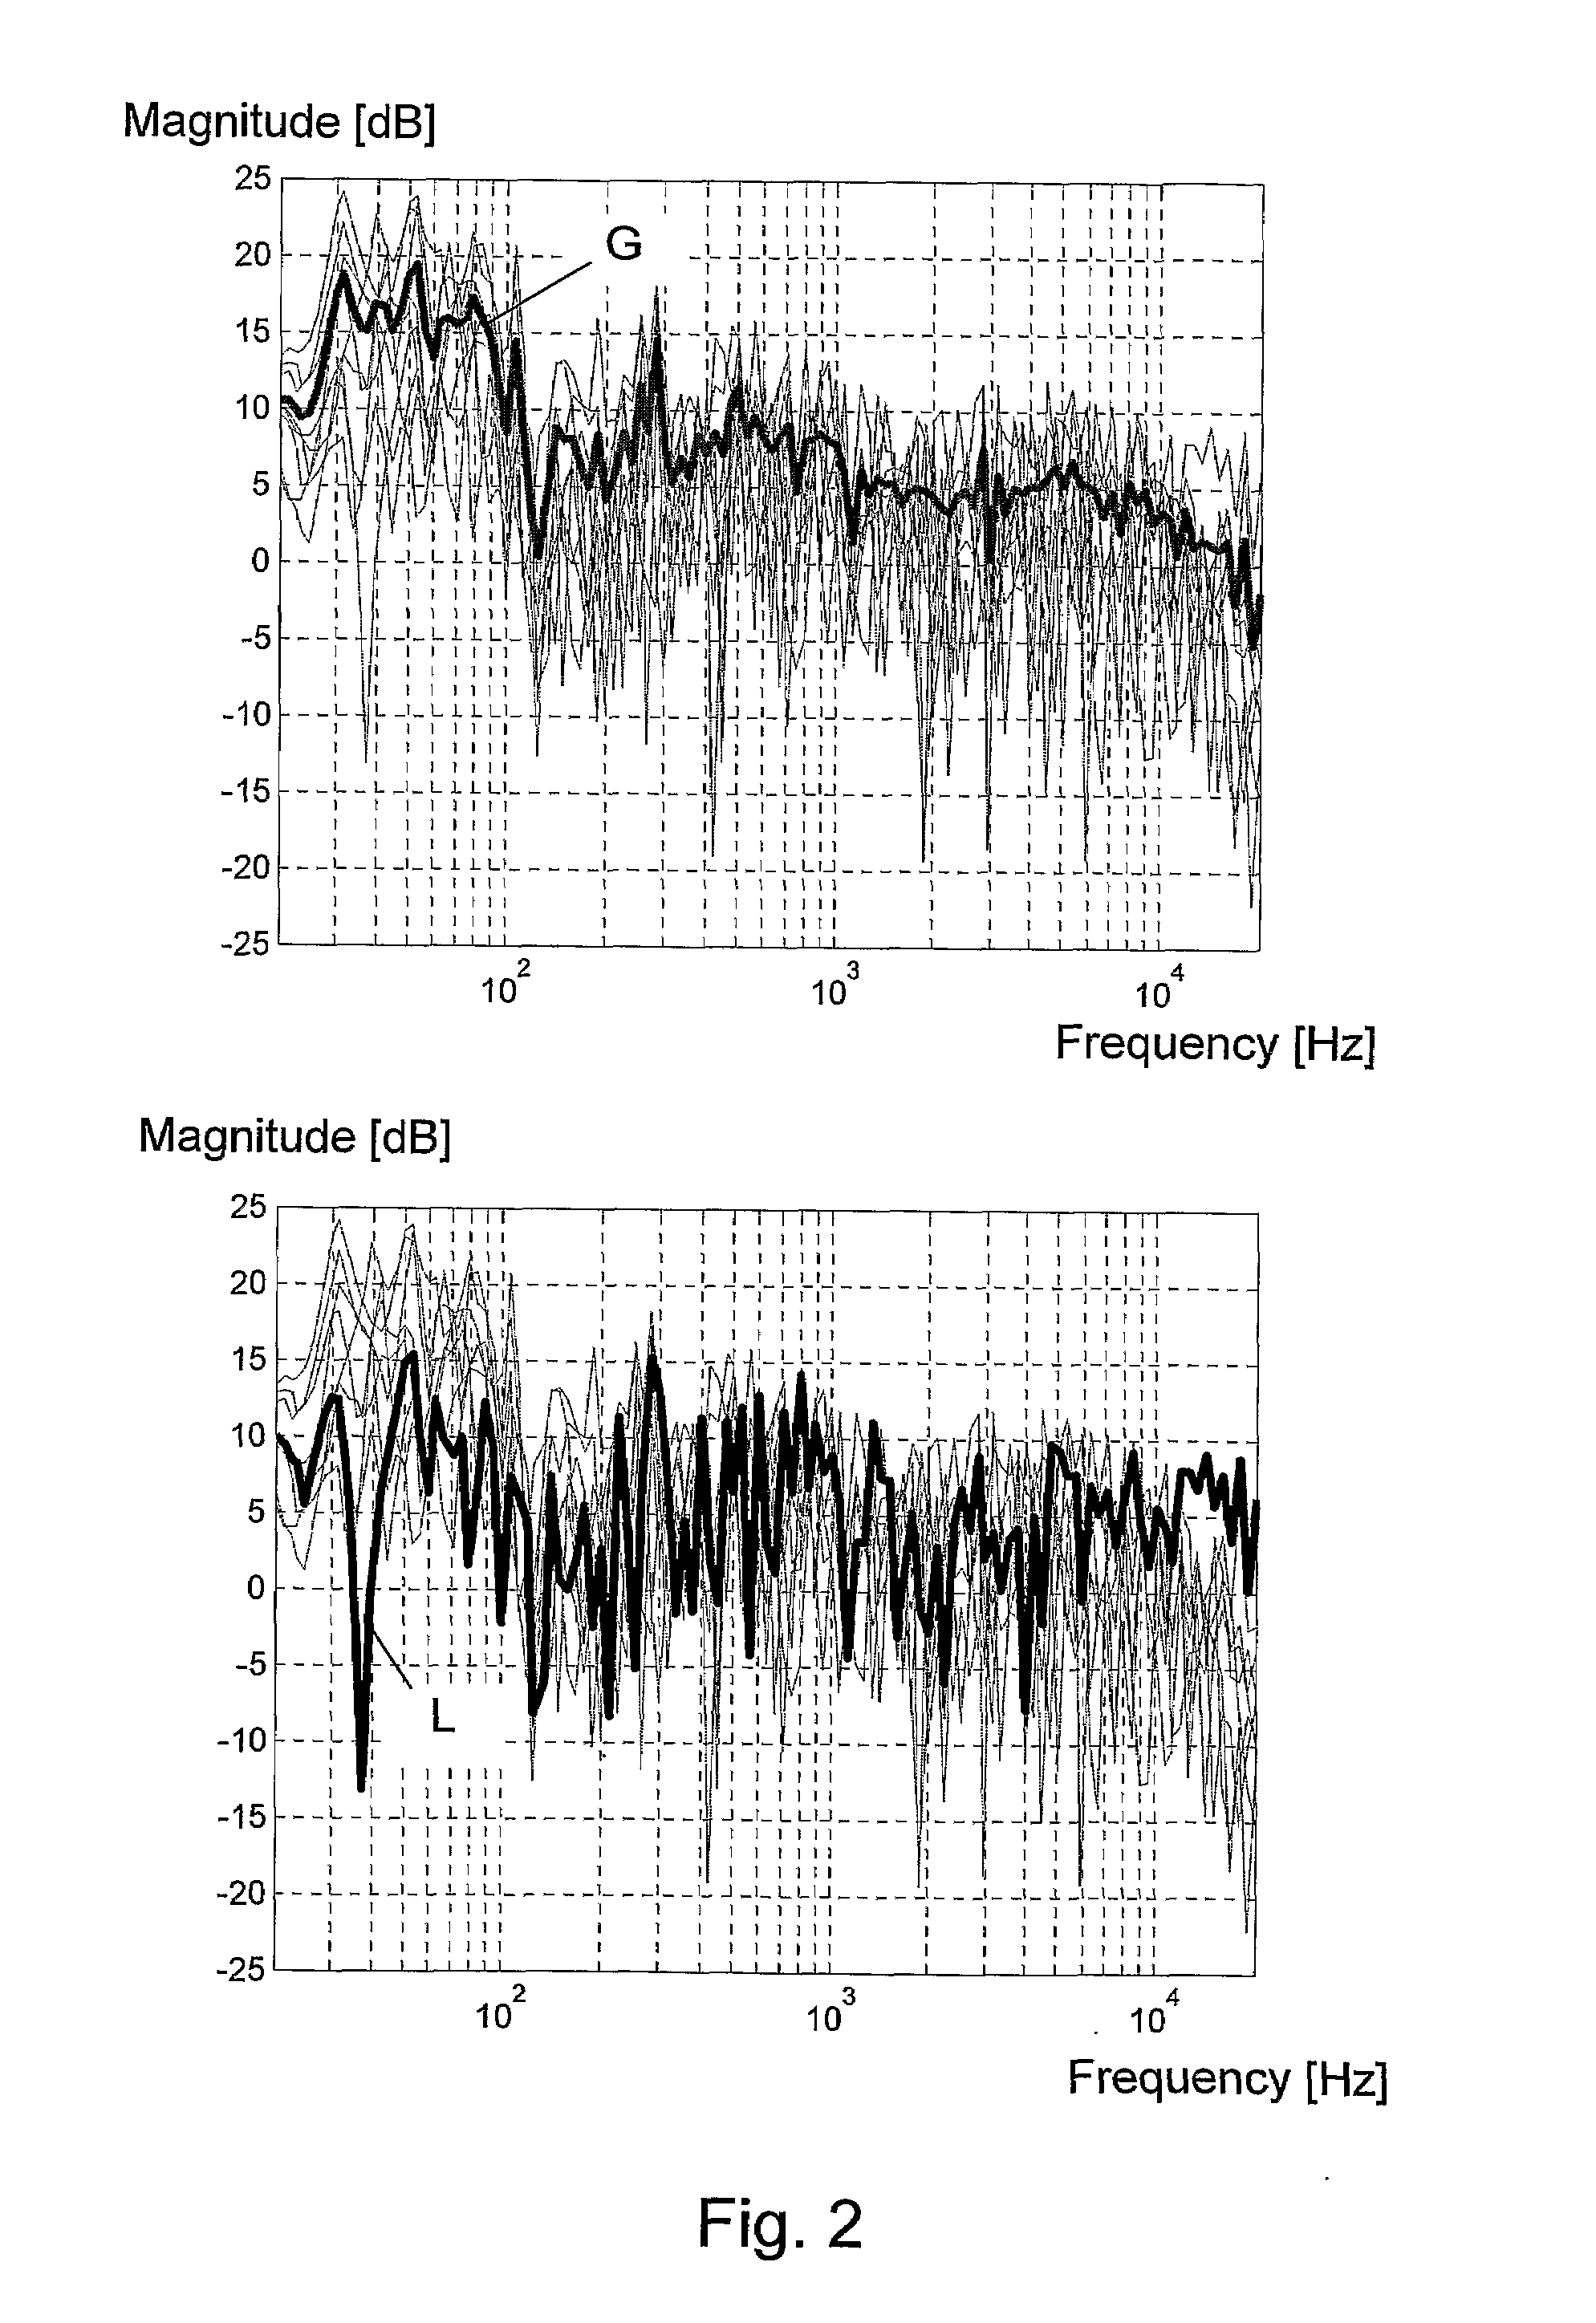 Method and system for equalizing a loudspeaker in a room